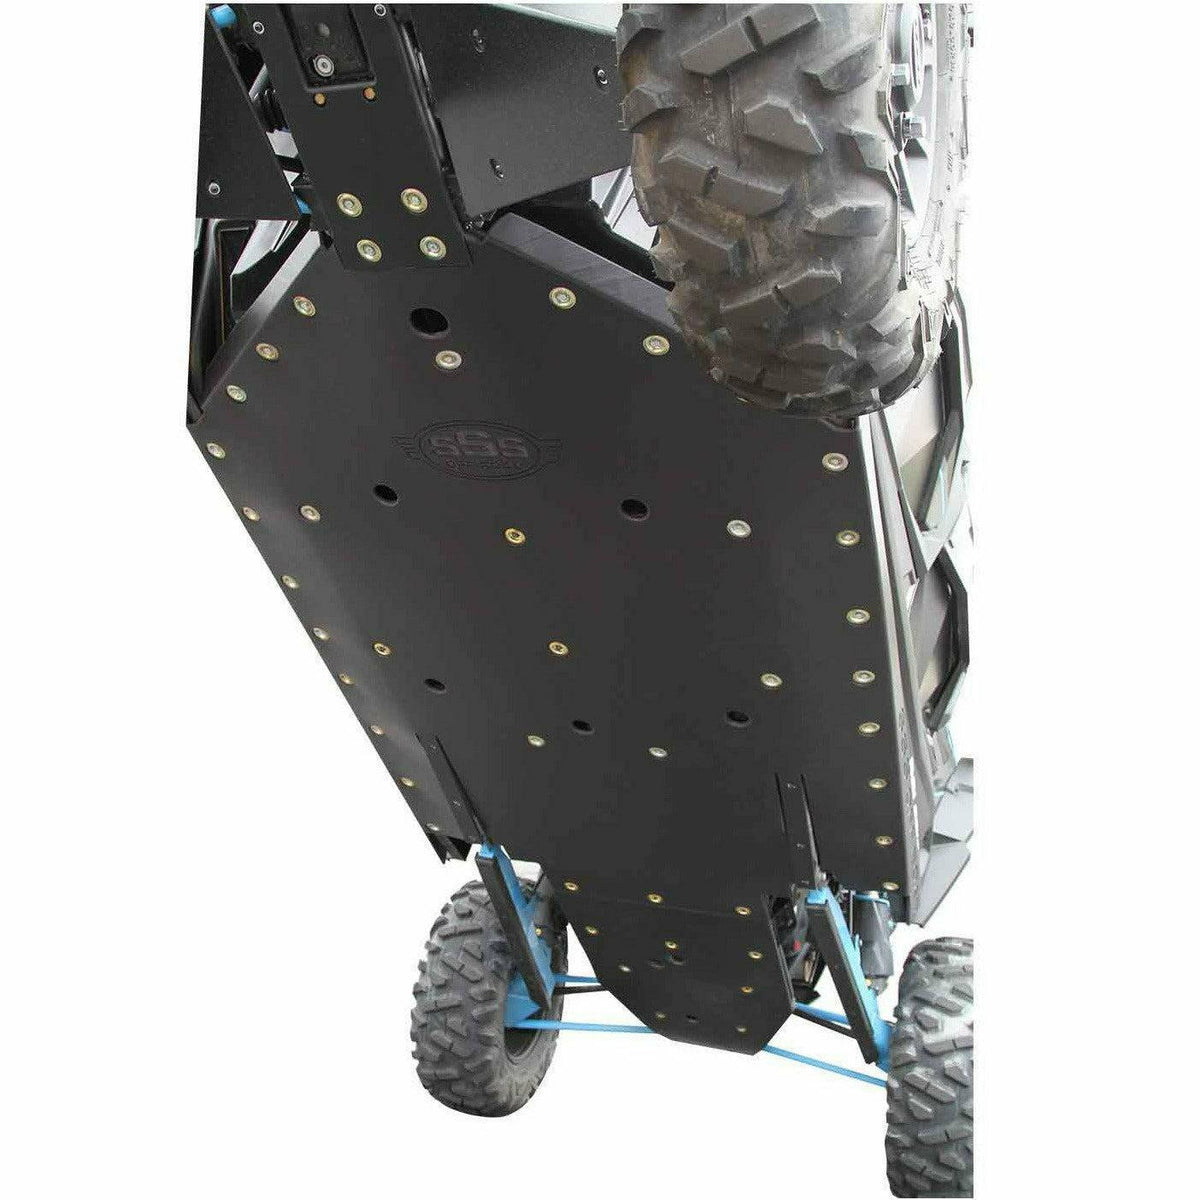 SSS Off-Road UHMW Skid Plate for Polaris RZR XP 4 1000